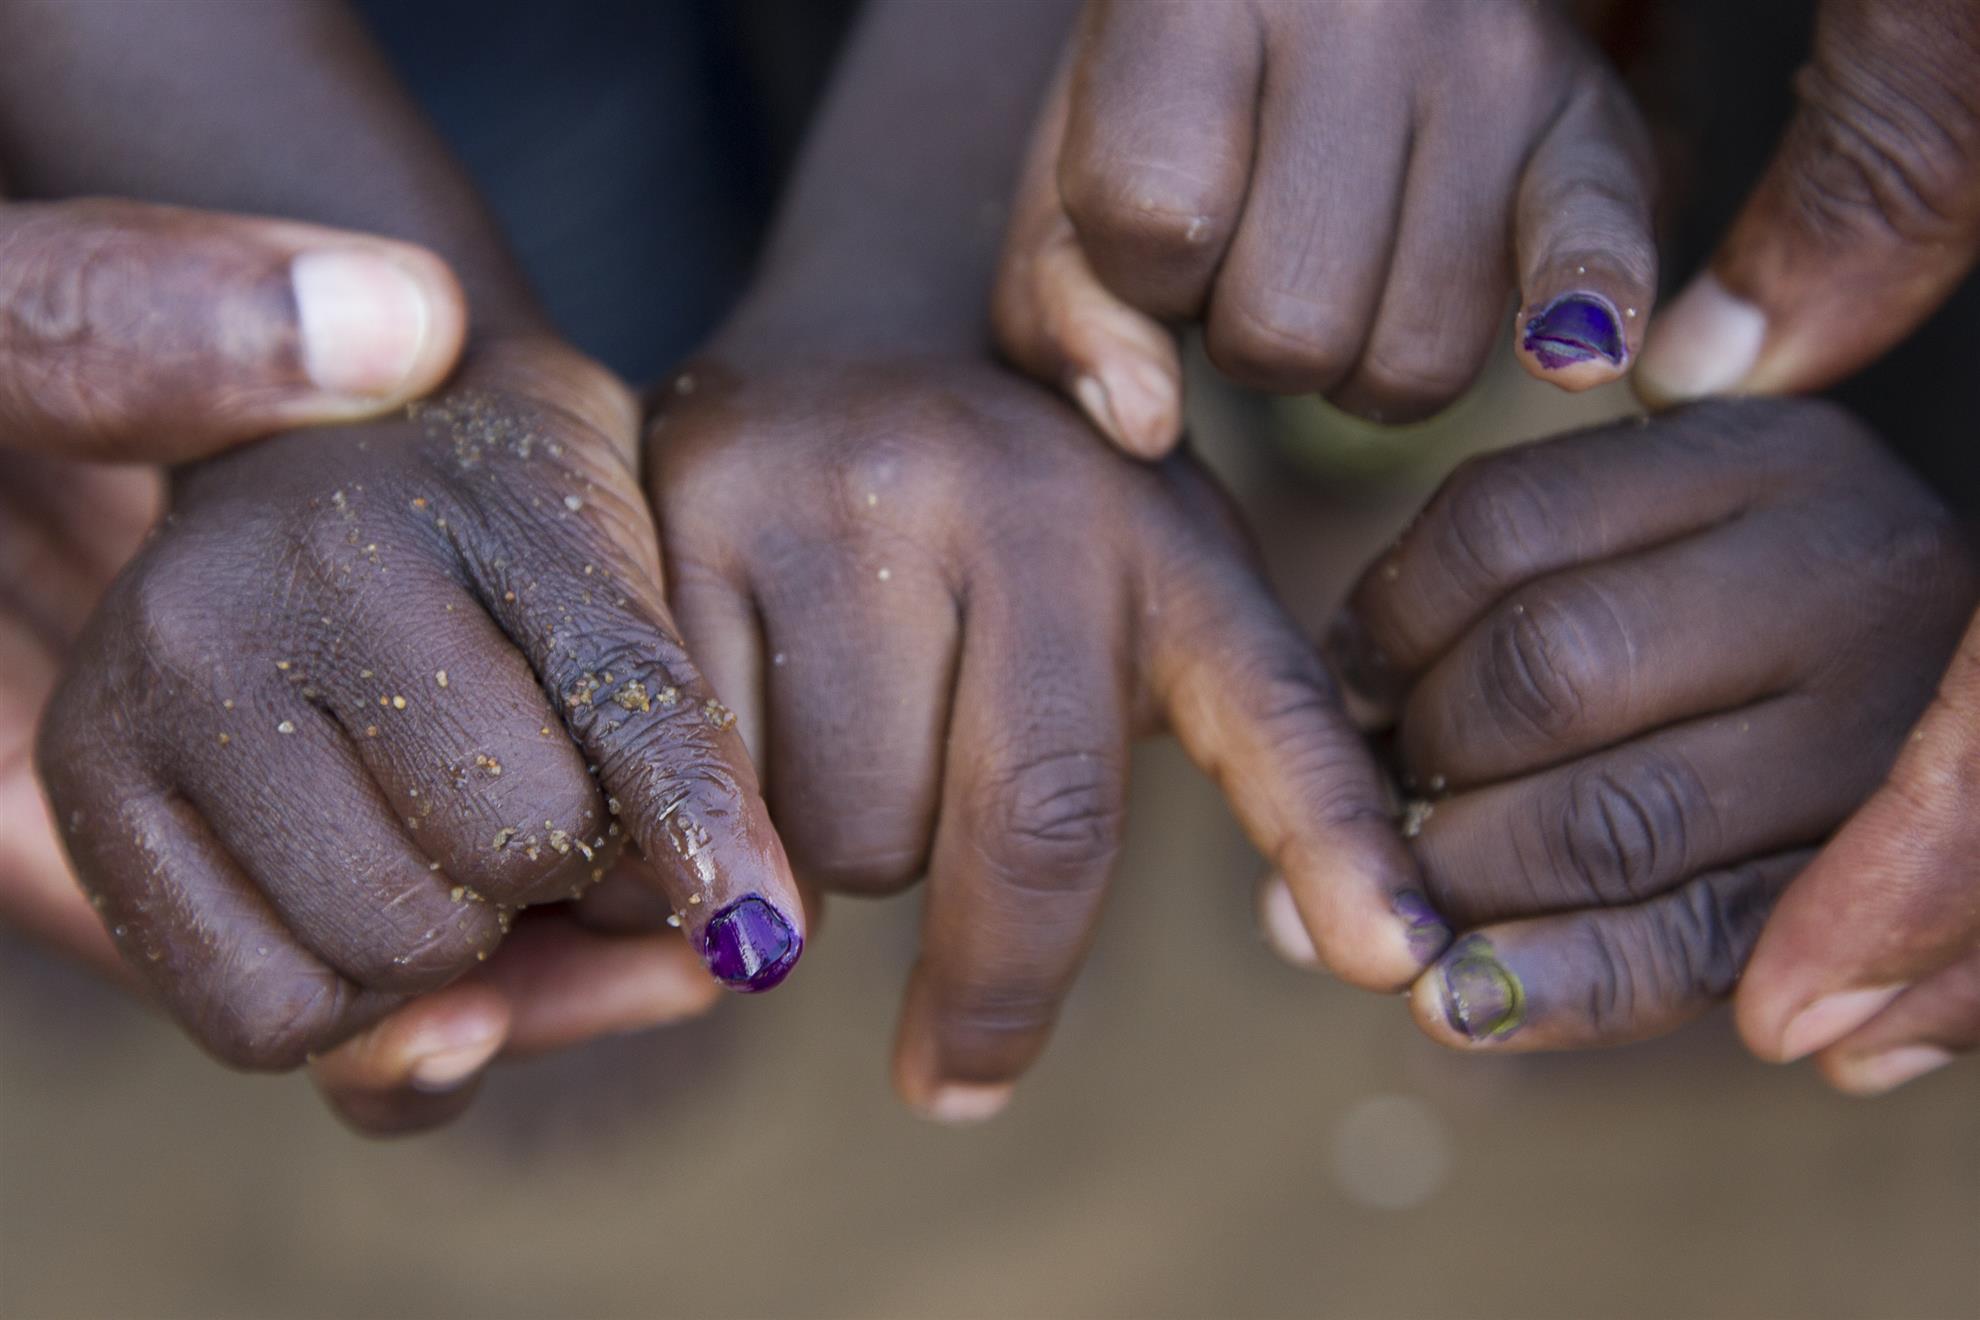 Children receive purple polish on pinkie to indicate they've been immuinized against polio